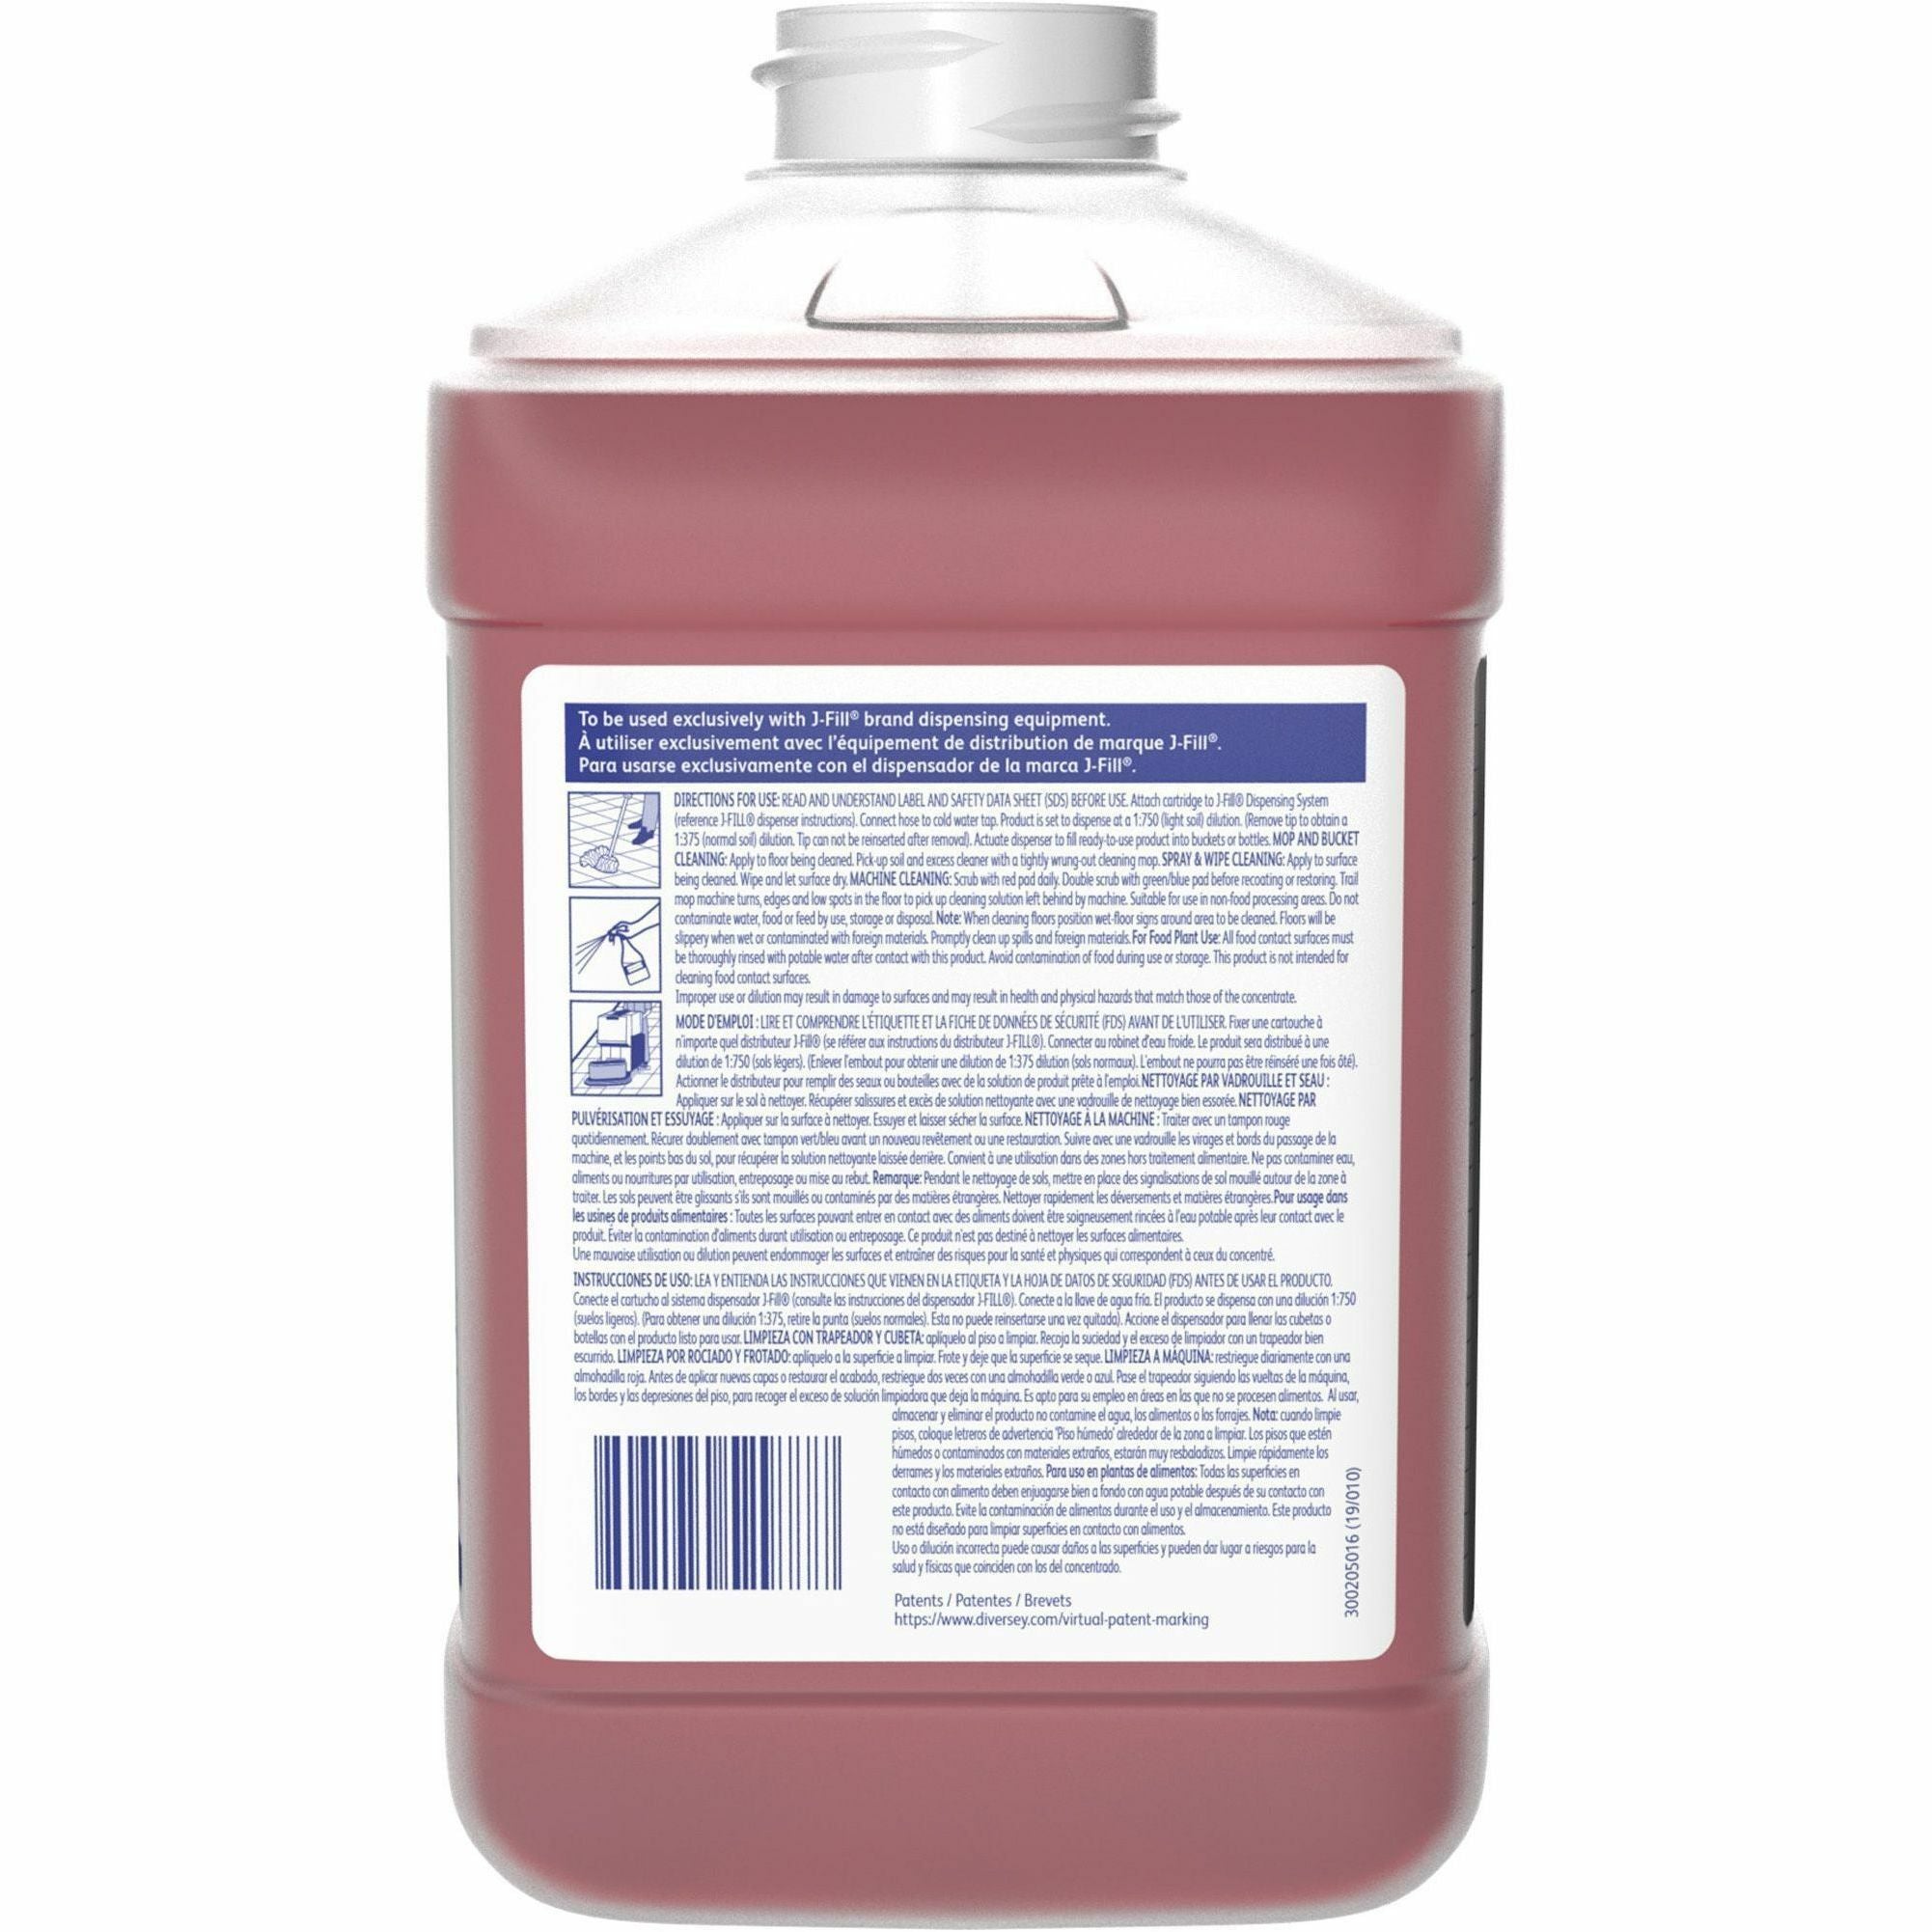 diversey-stride-floral-hc-neutral-cleaner-concentrate-845-fl-oz-26-quart-floral-scent-2-carton-rinse-free-non-alkaline-film-free-low-foaming-pleasant-scent-kosher-red_dvo904717 - 3